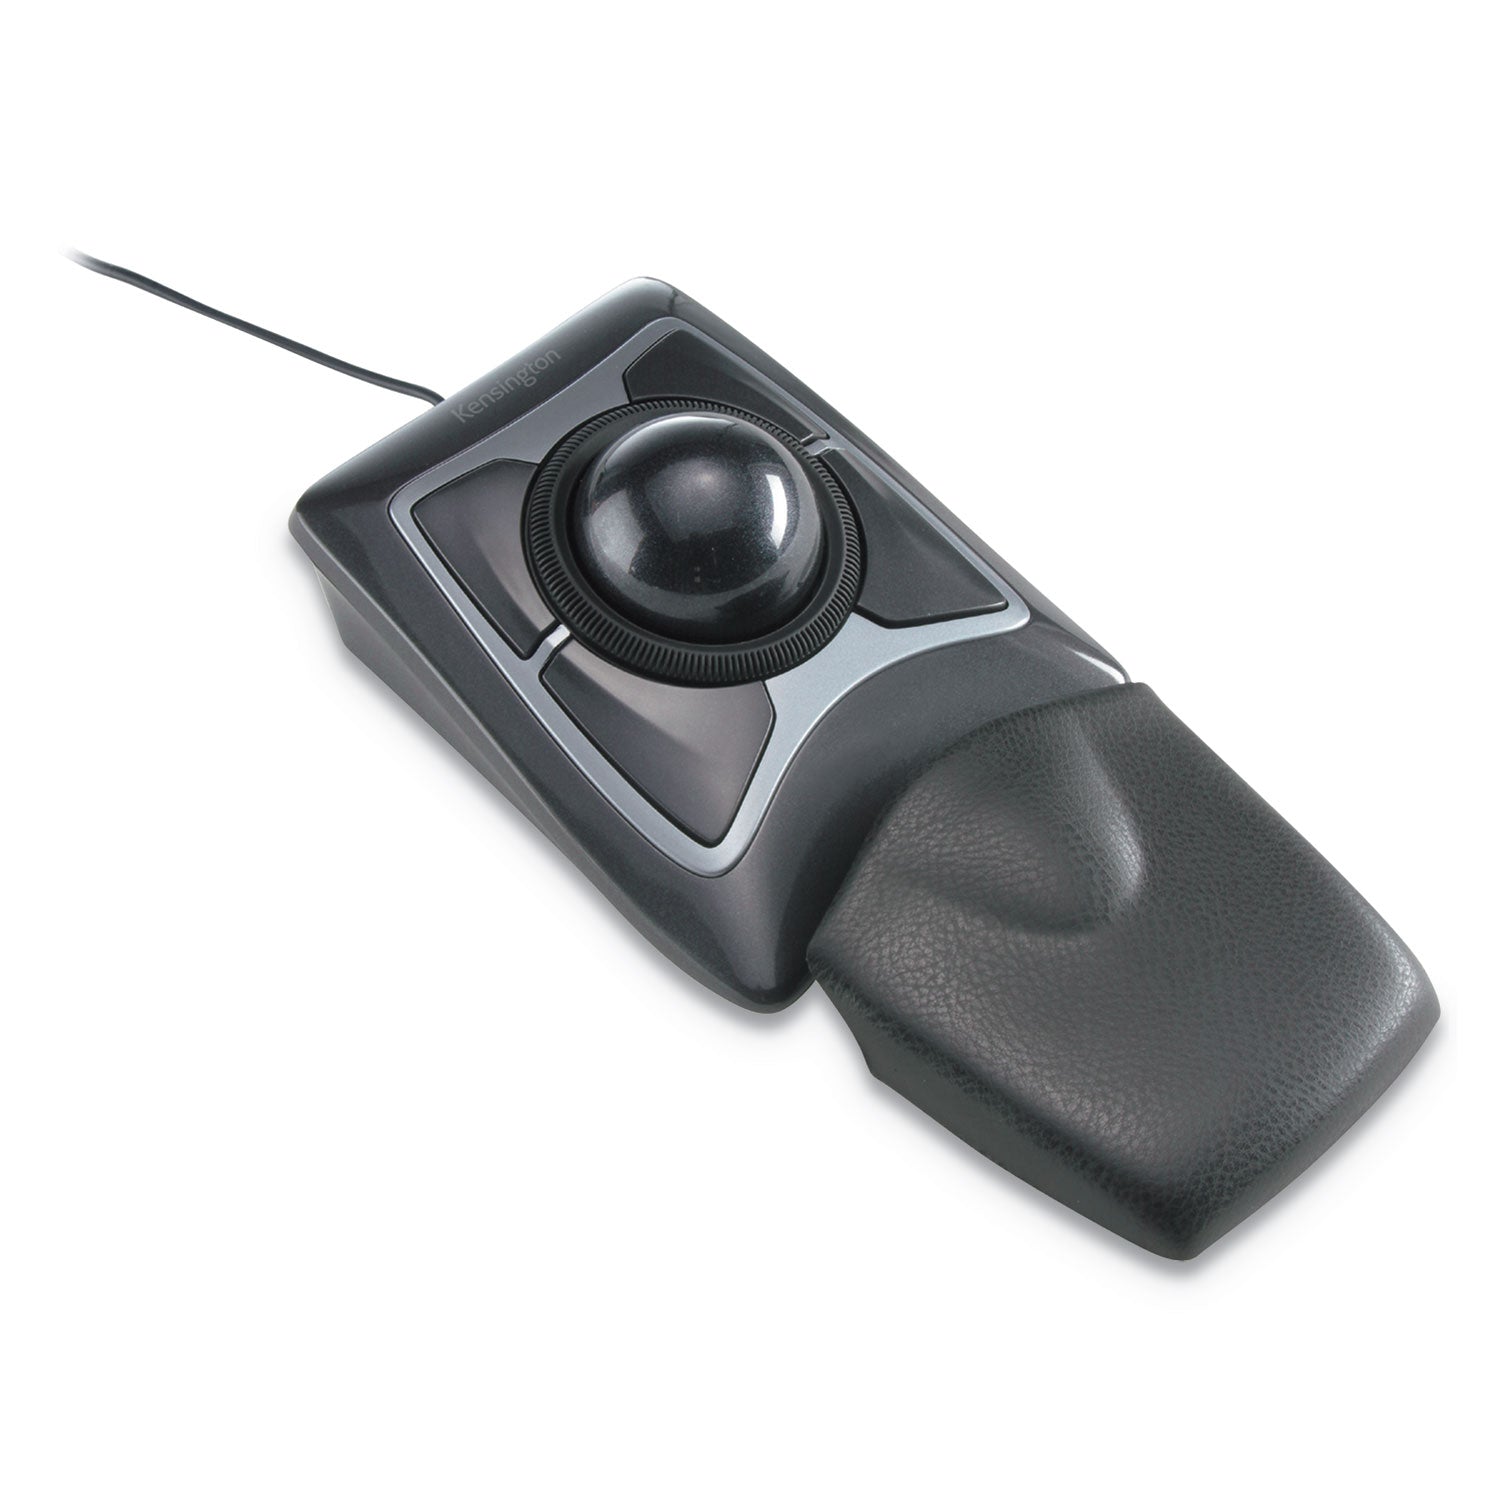 Expert Mouse Trackball, USB 2.0, Left/Right Hand Use, Black/Silver - 